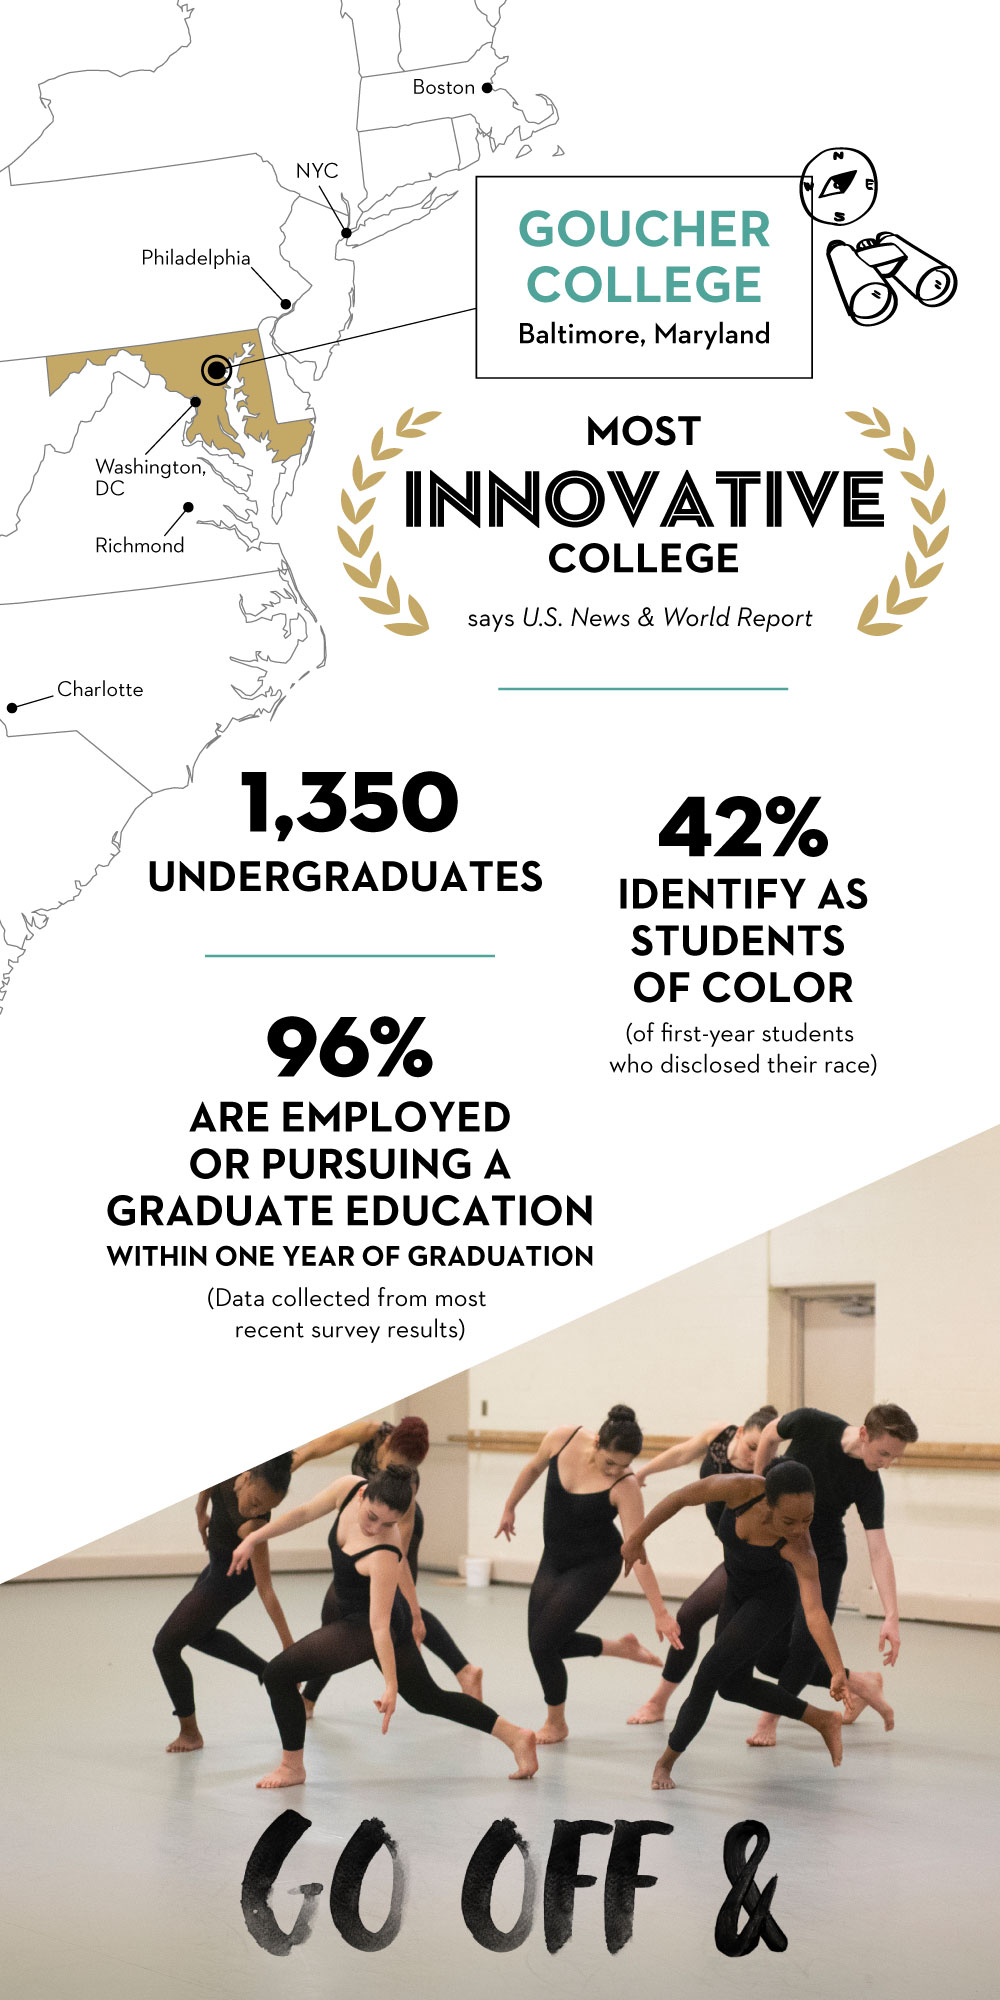 1350 Undergraduates - 42% Identify as Students of Color - 96% Are Employed or Pursuing a Graduate Education